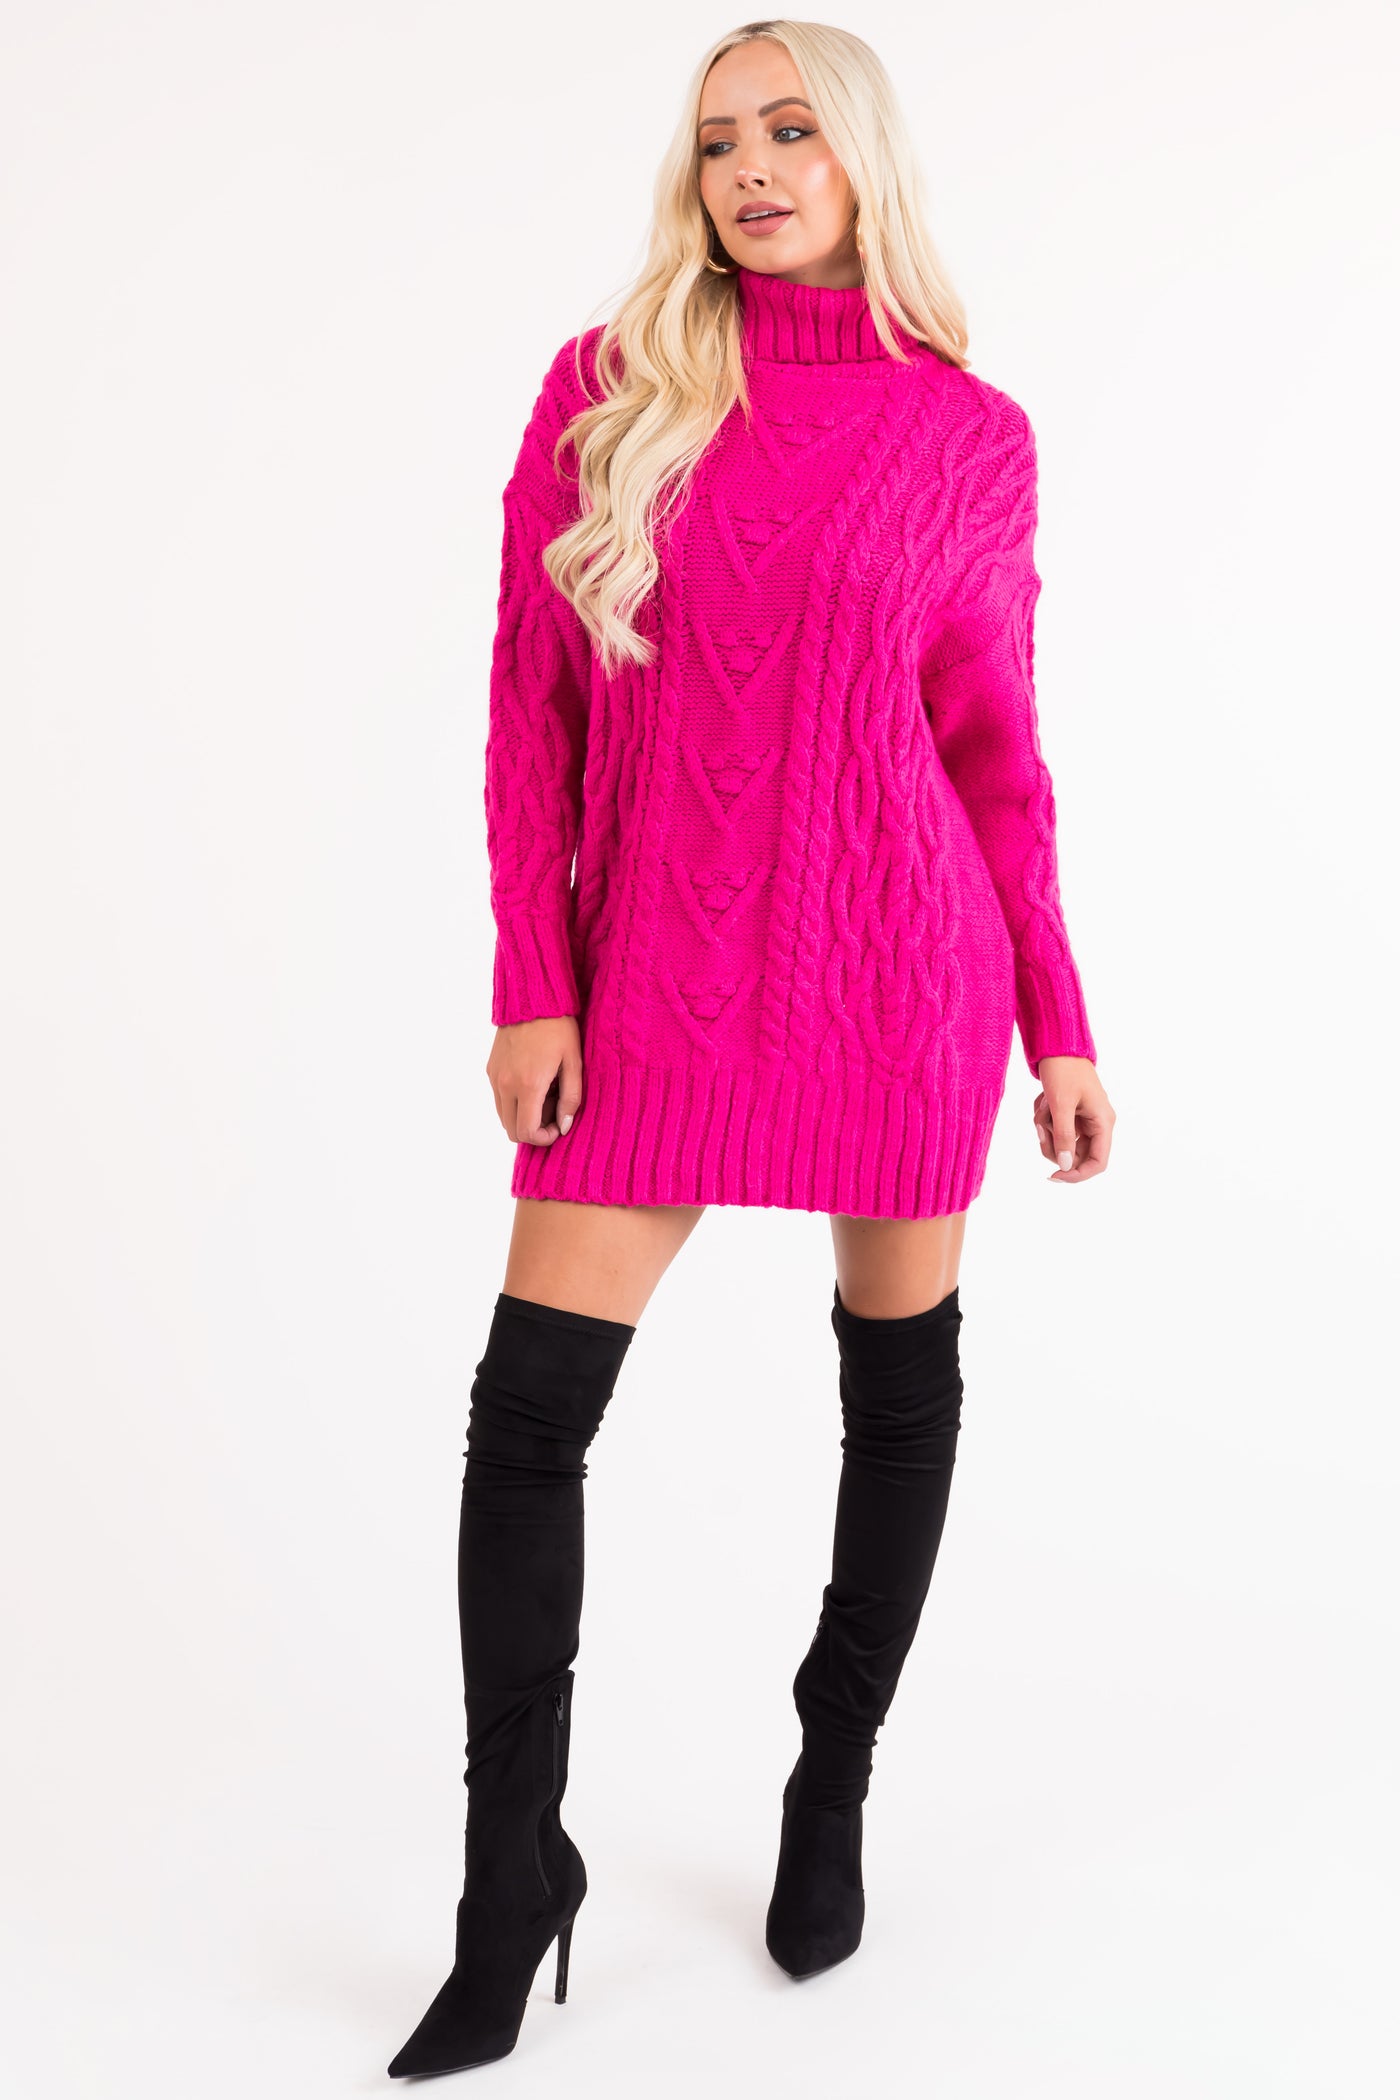 Magenta Cable Knit Turtleneck Sweater Dress